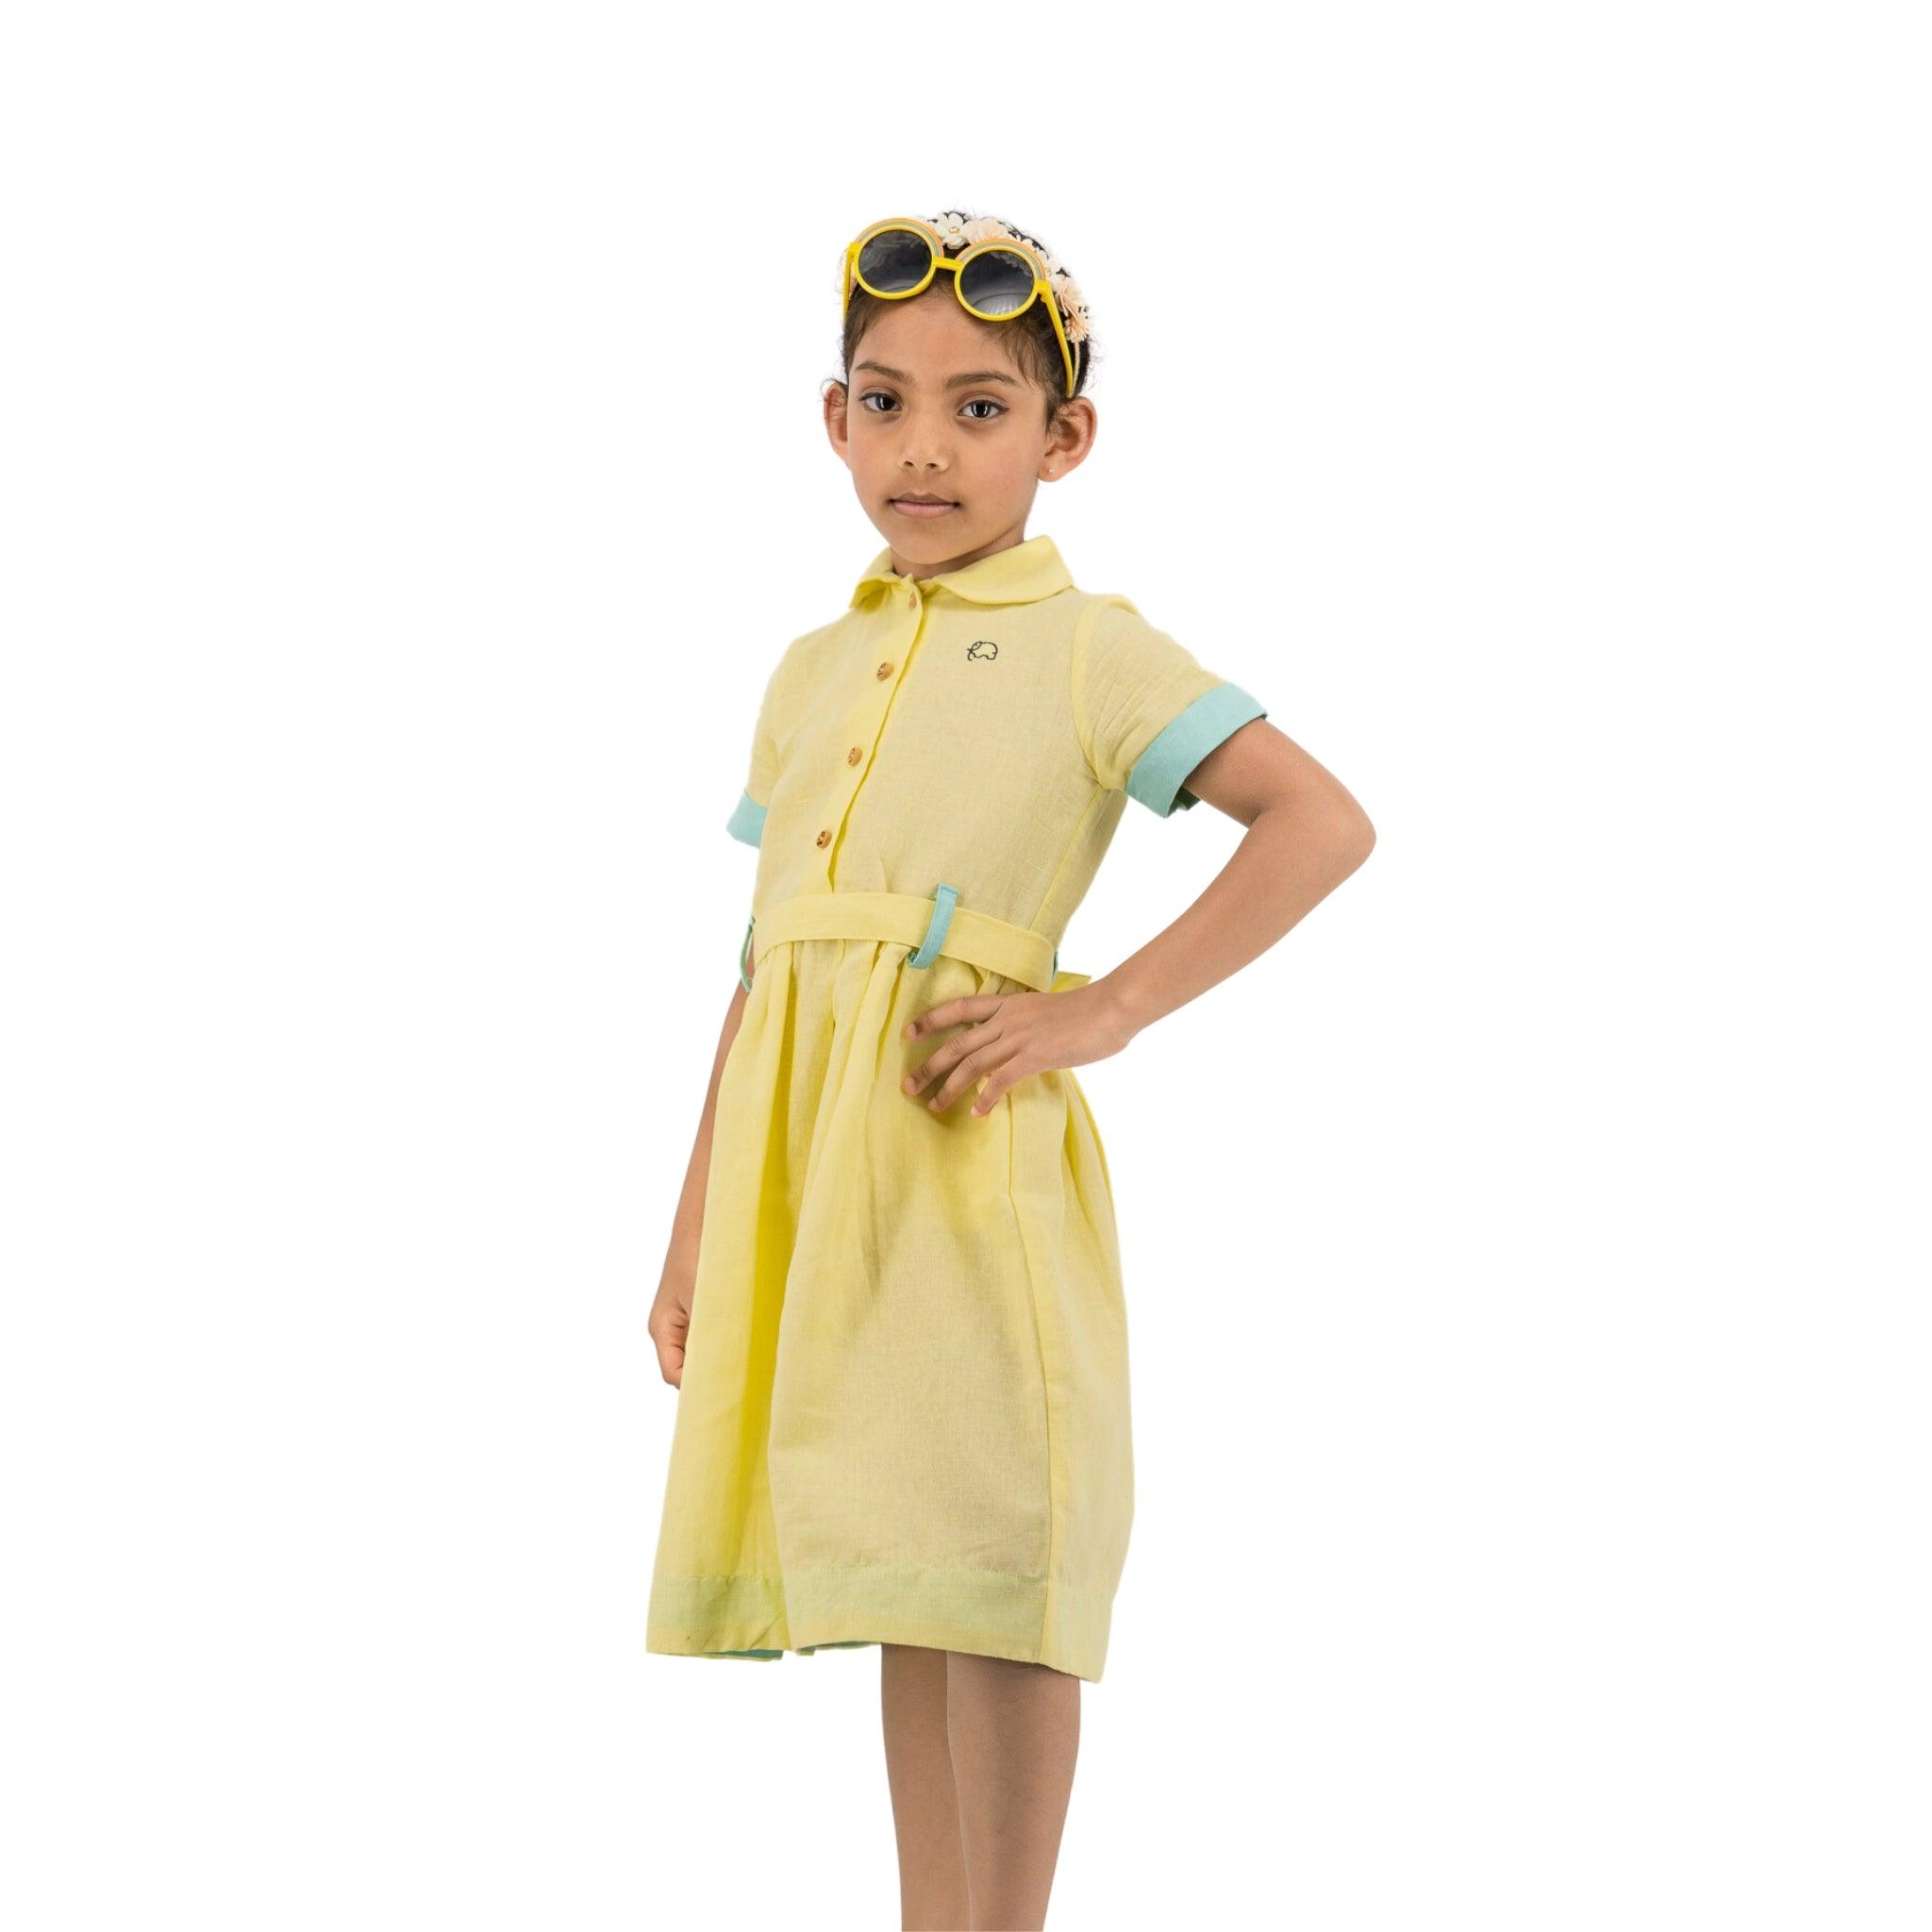 A young girl stands confidently, wearing a Karee elfin yellow linen dress and blue-trimmed goggles on her head, isolated on a white background.